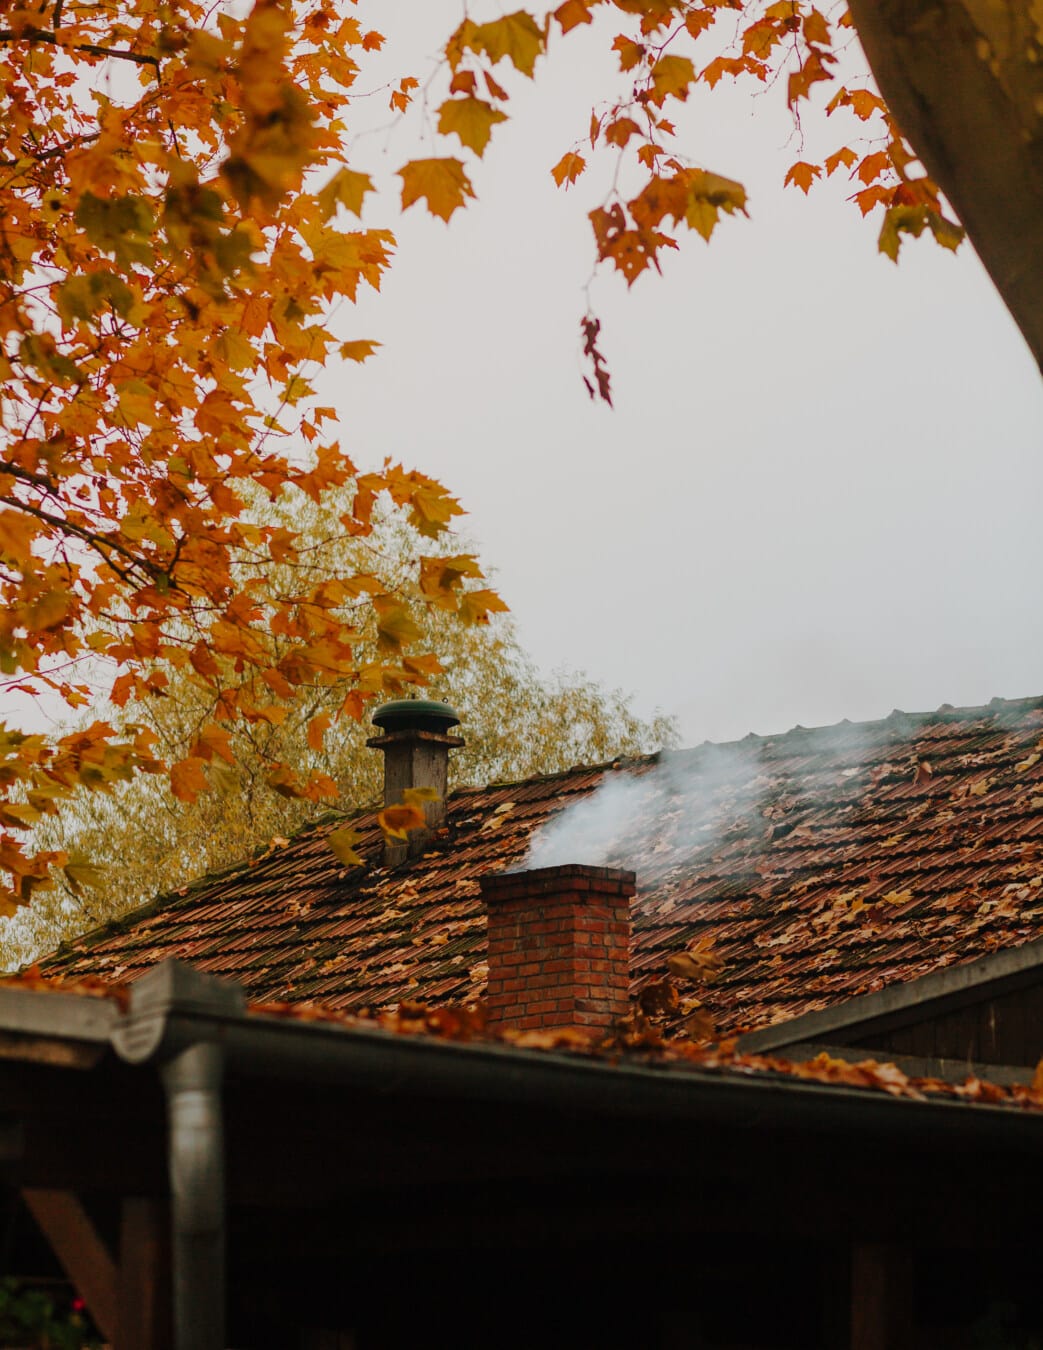 smoke, chimney, autumn season, rooftop, roof, cold, weather, tree, house, leaf